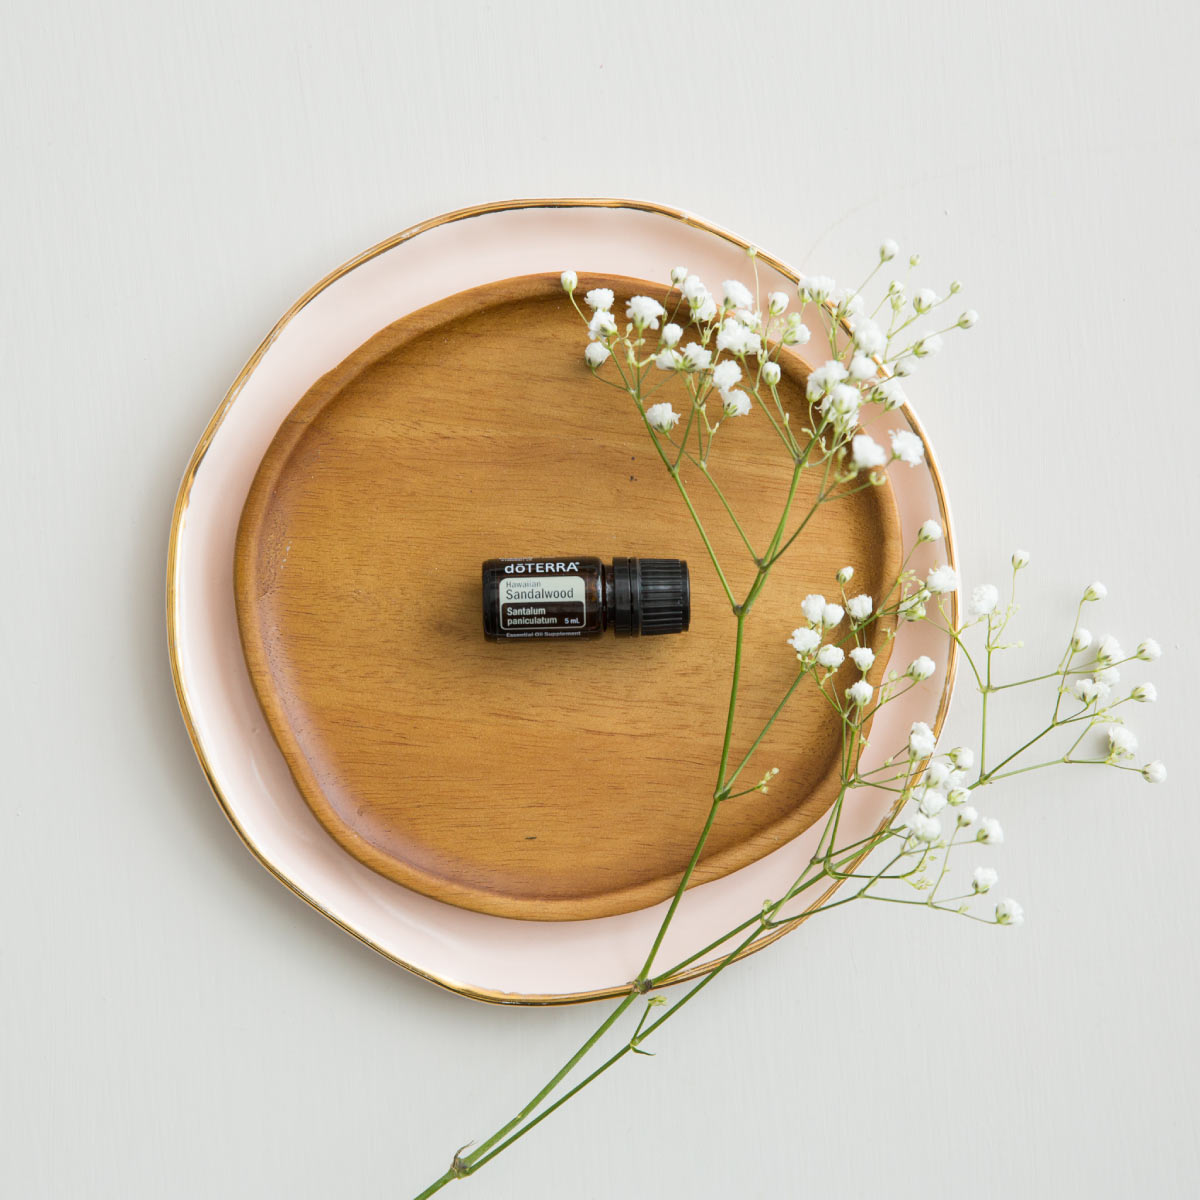 Bottle of doTERRA Hawaiian Sandalwood oil resting on a wooden dish next to small white flowers. There are dozens of benefits of Hawaiian Sandalwood oil, including benefits for skin, meditation, and promoting relaxation.